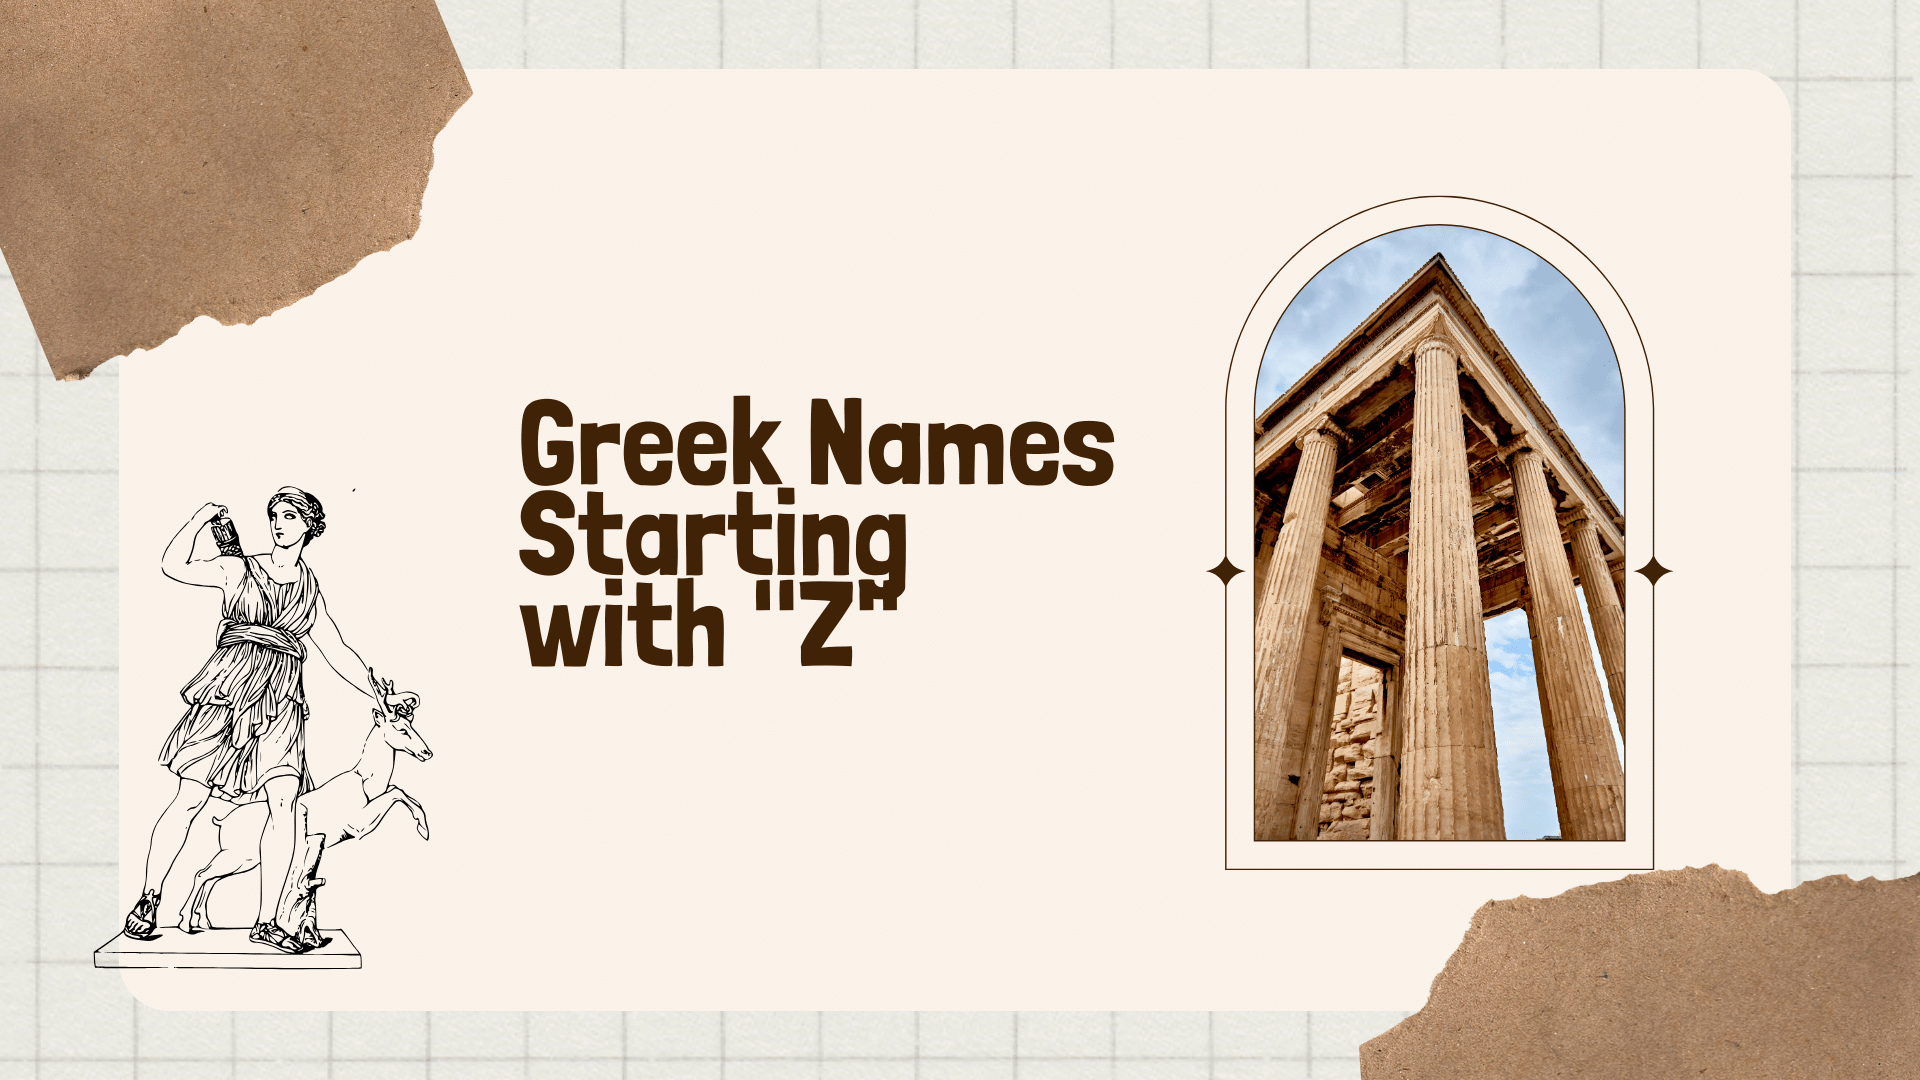 Greek Names Starting With "Z"